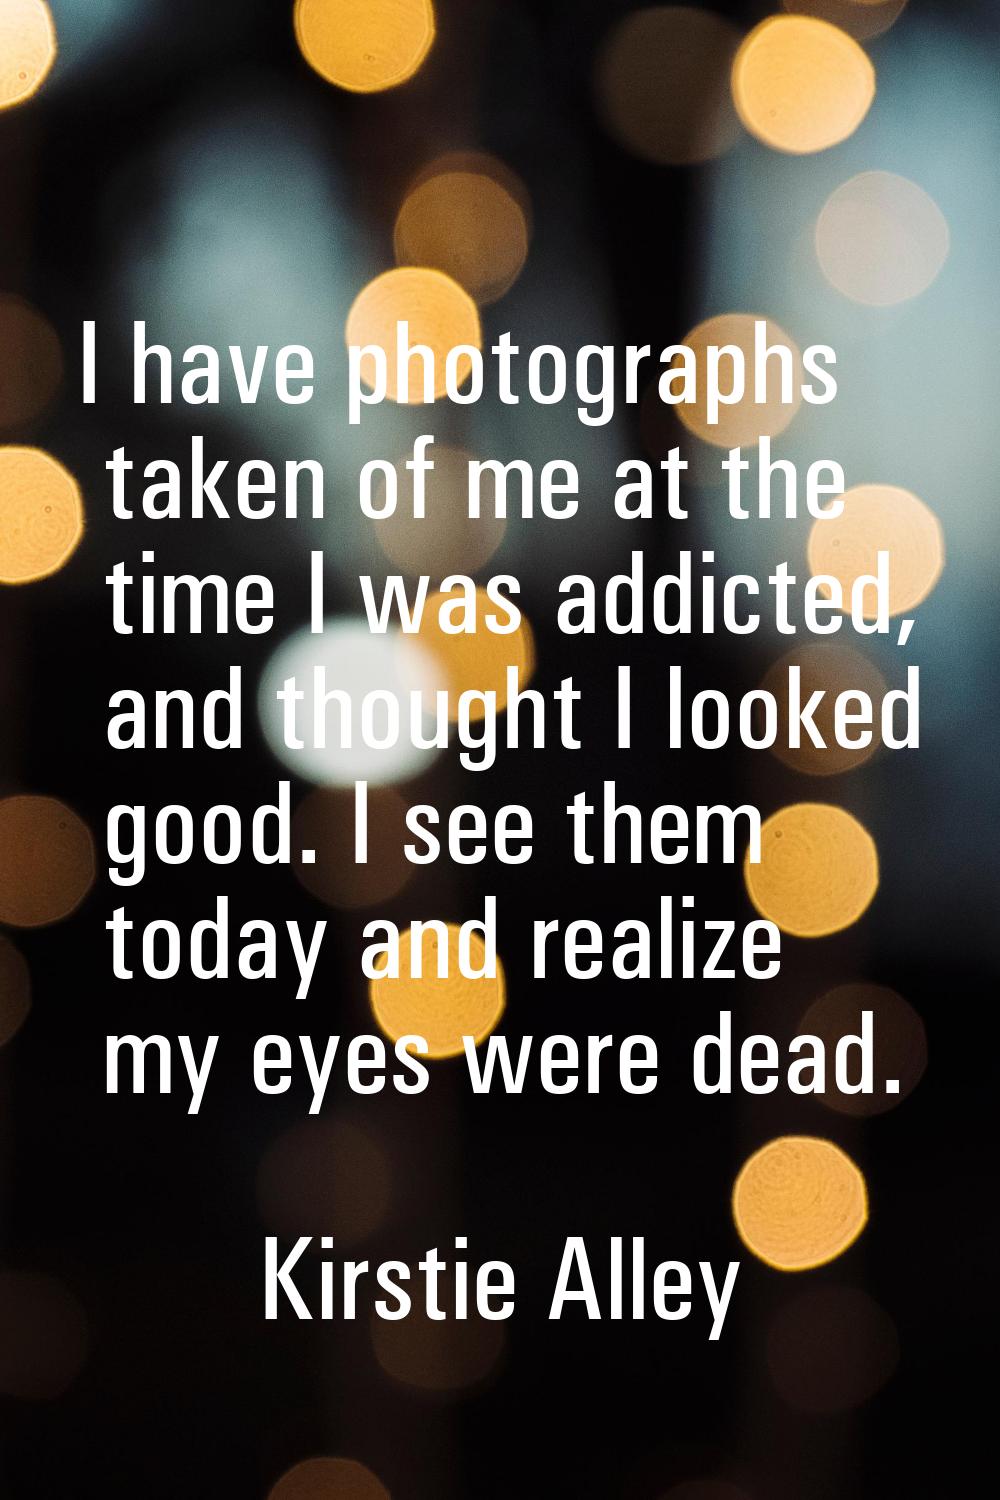 I have photographs taken of me at the time I was addicted, and thought I looked good. I see them to